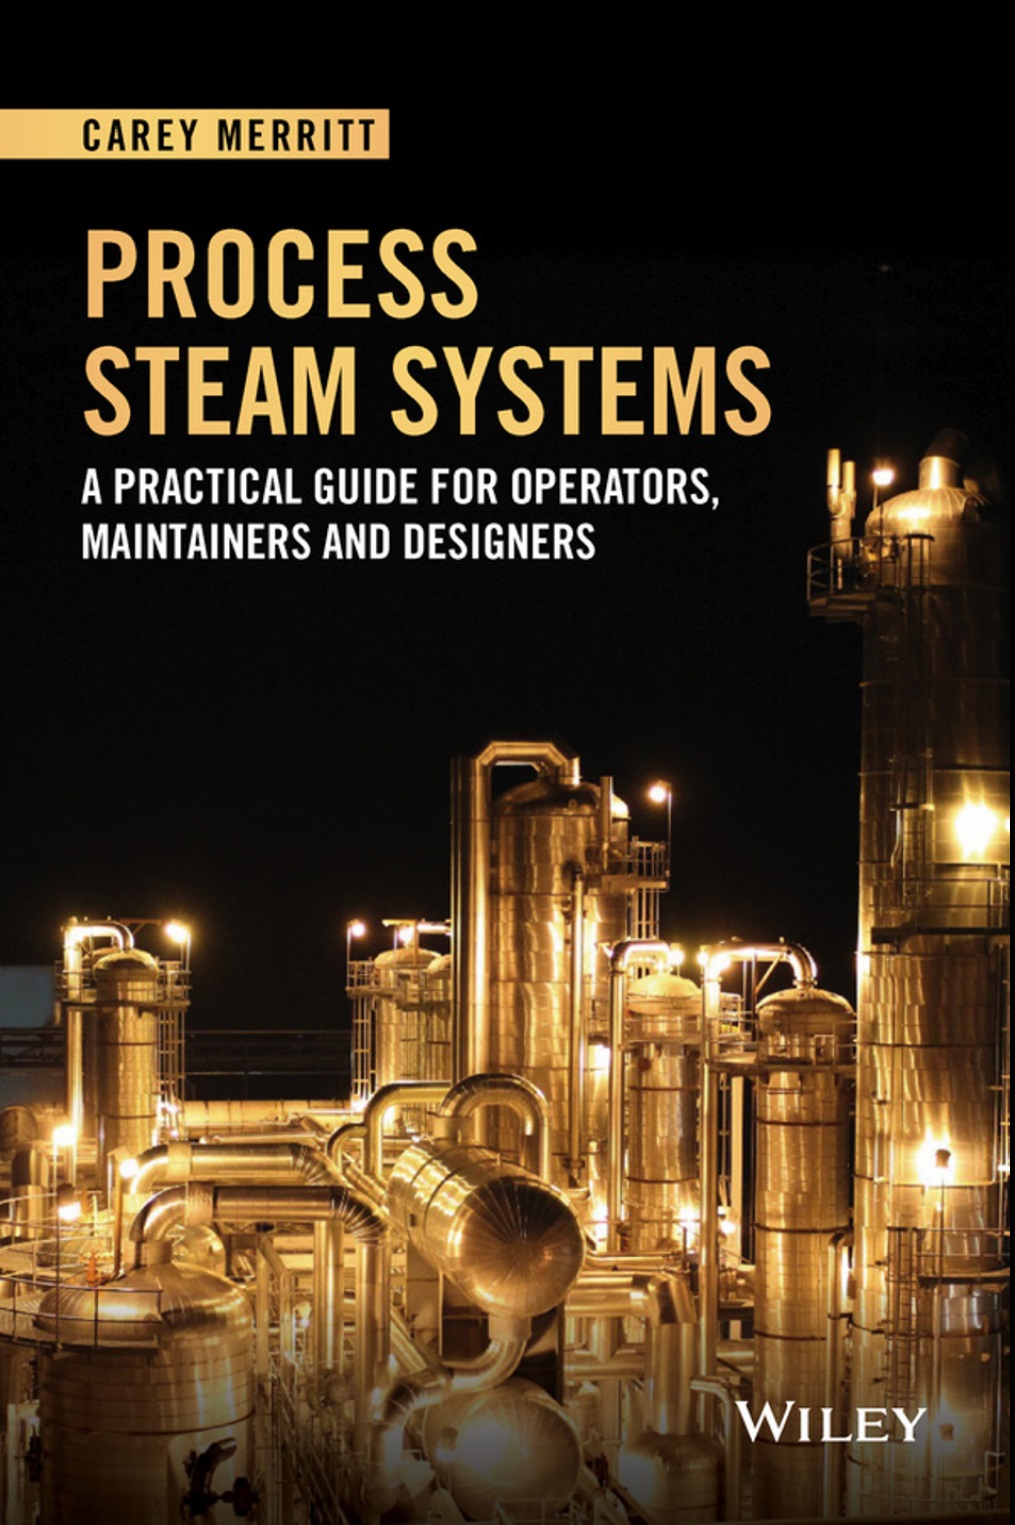 Steam and process controls фото 25